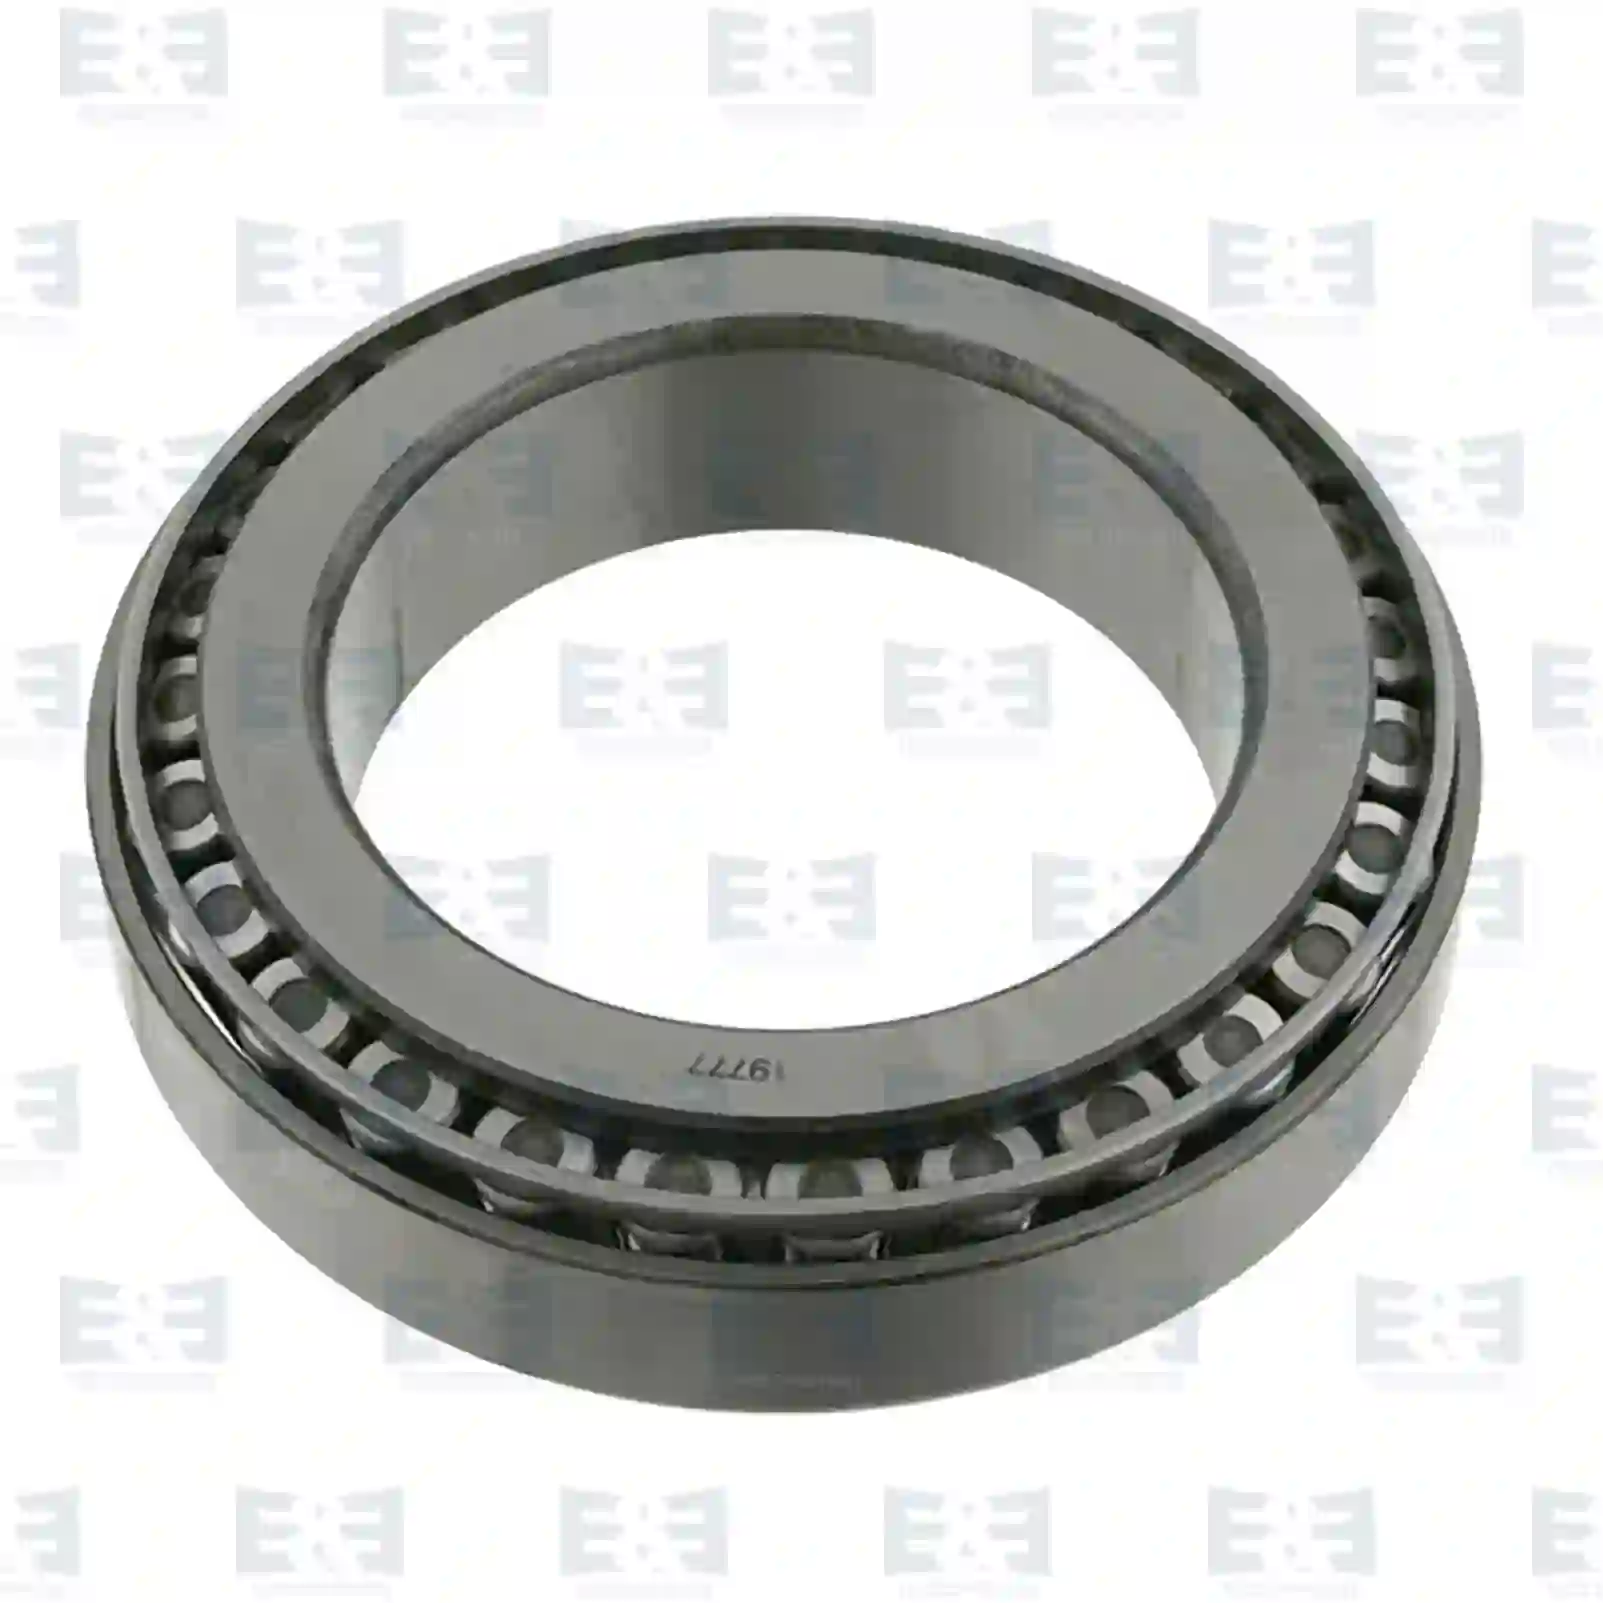 Rear Axle, Complete Tapered roller bearing, EE No 2E2270739 ,  oem no:1453936, 01101856, 000720900000, 0029815005, 0029815305, 0059819005, 0079810205, 0179818105, 5001014916, 264960, 351715, 362226, 6691450000, ZG02970-0008 E&E Truck Spare Parts | Truck Spare Parts, Auotomotive Spare Parts